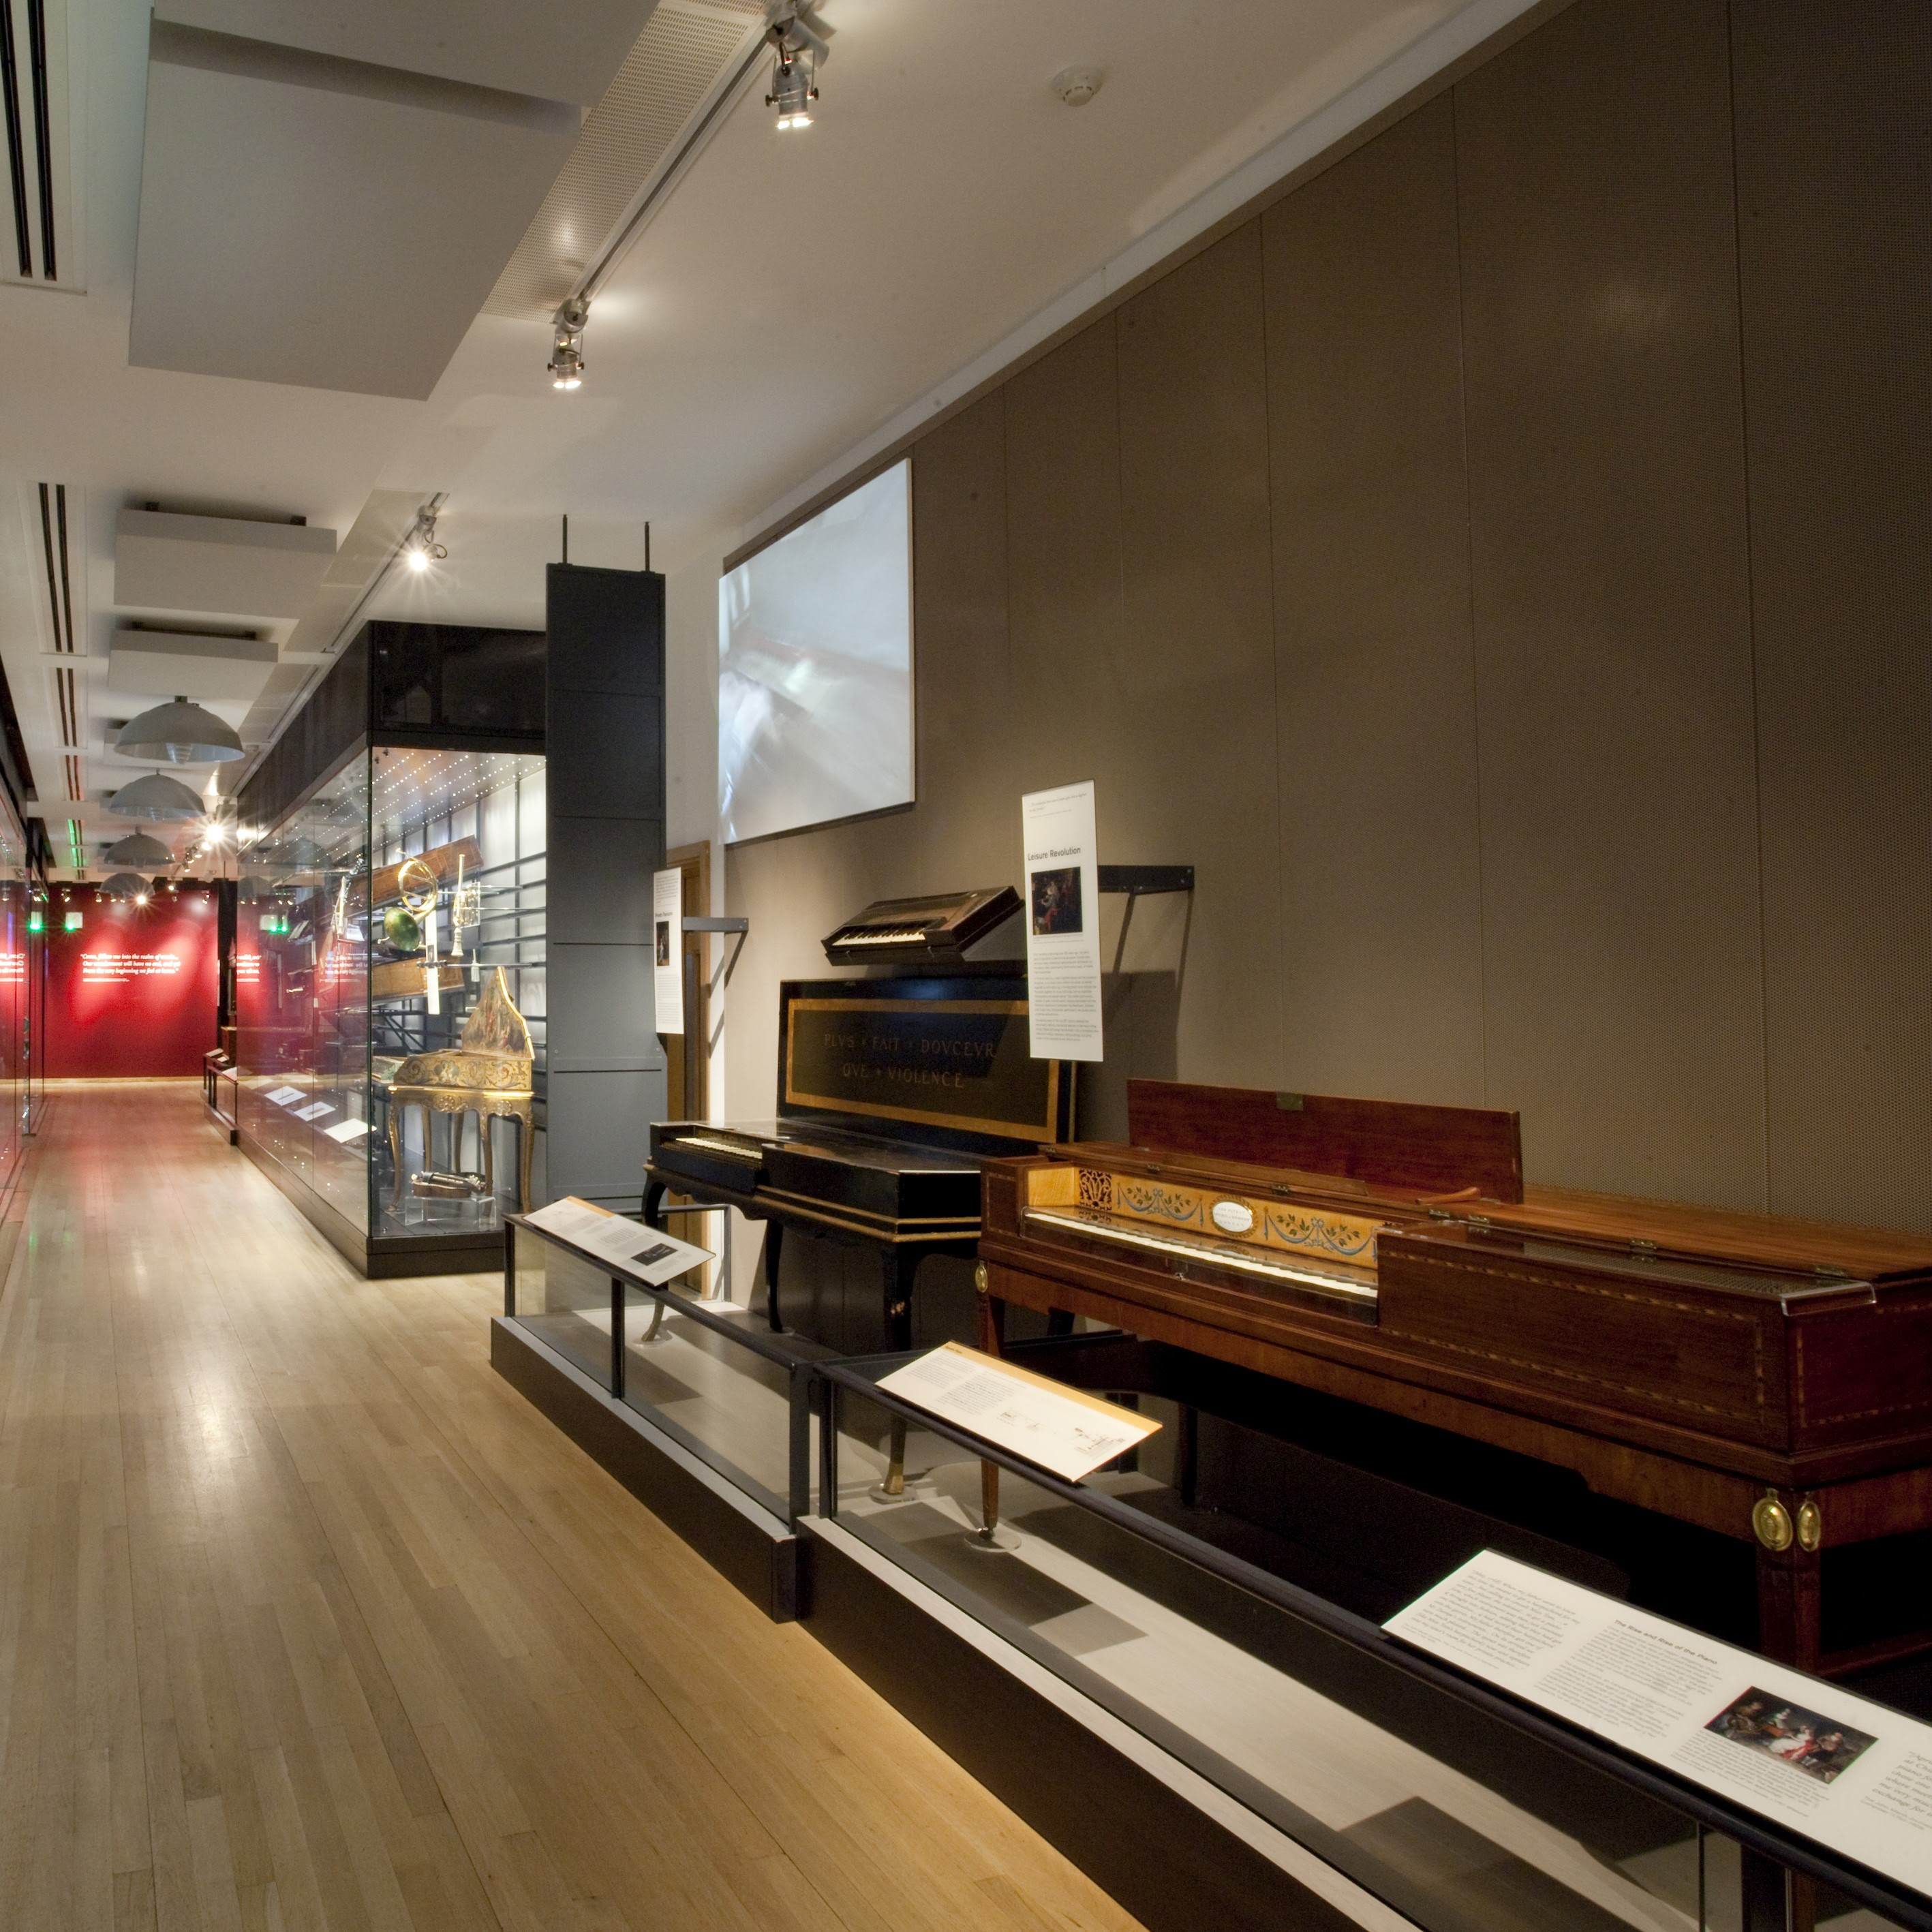 A keyboard display in the Music Gallery